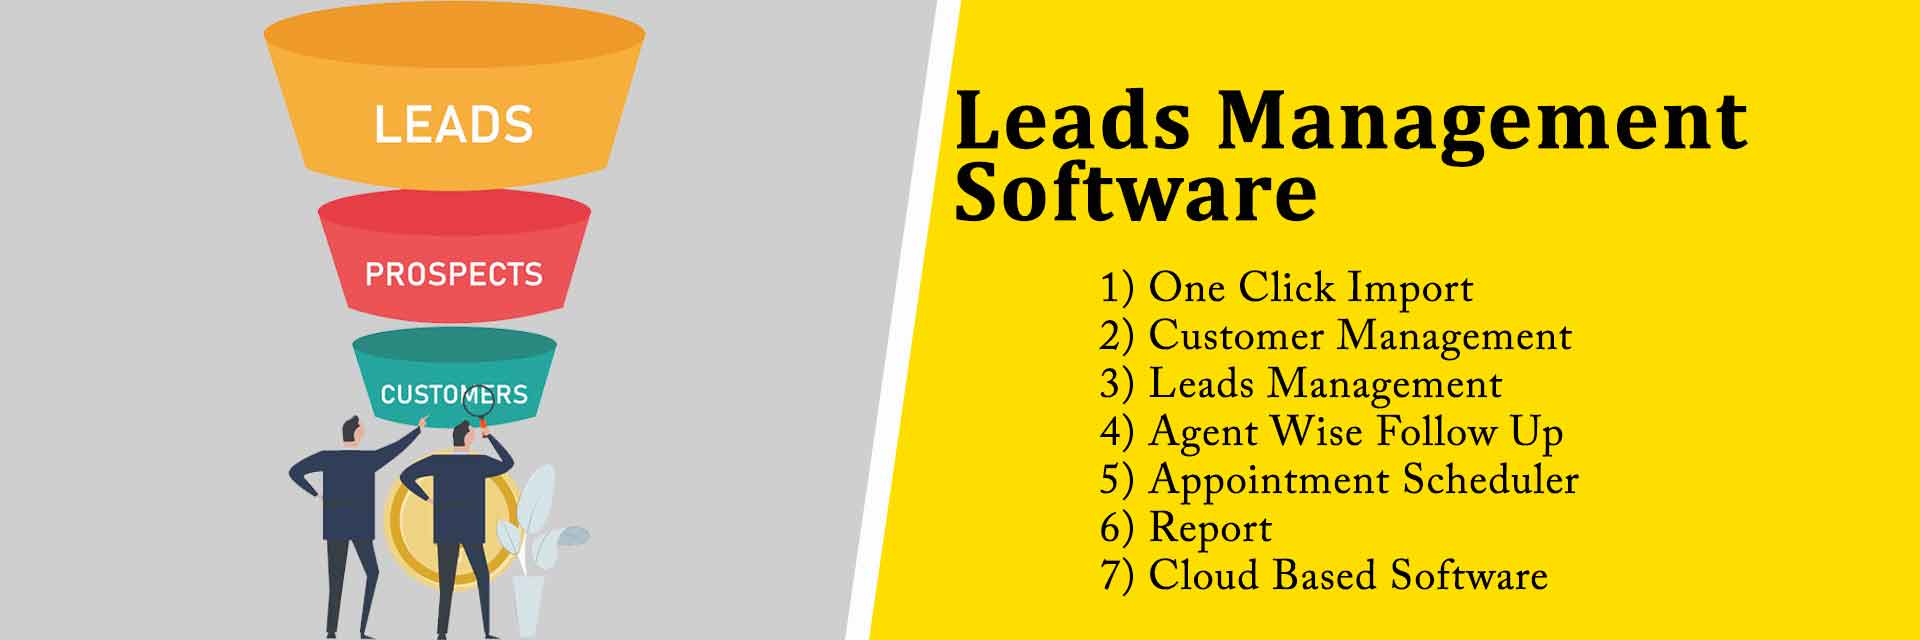 Leads Management Software in Nagpur